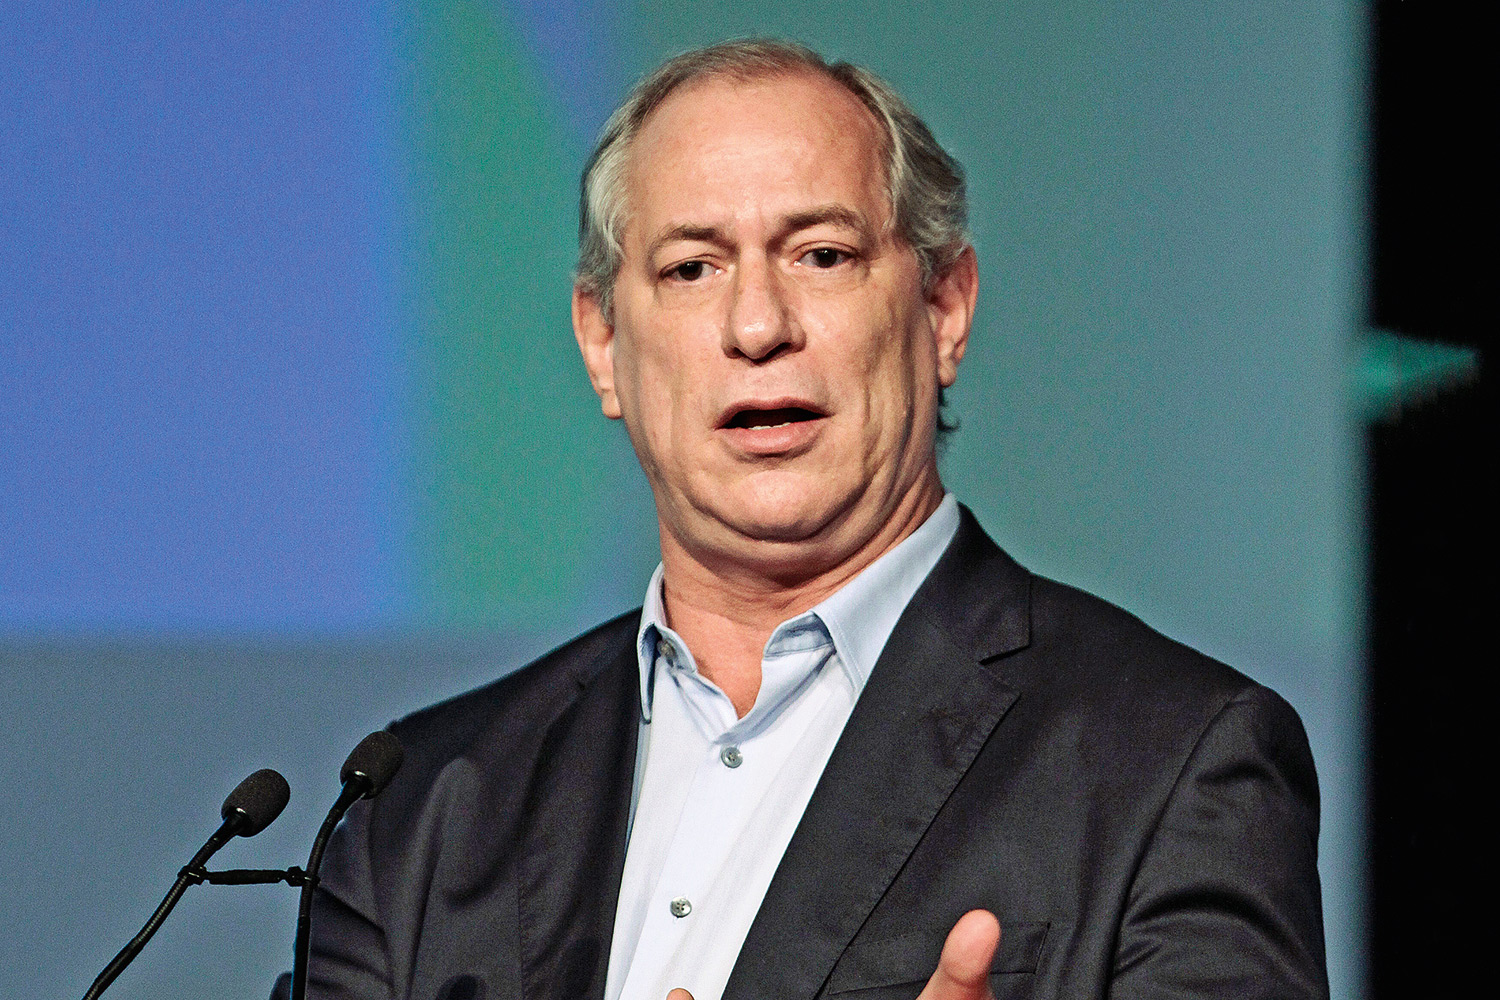 Ciro Gomes is a well-known name of the center-left who wanted to be the alternative by harshly attacking Lula. This strategy did not bear the expected fruits so far. Sérgio Moro has already surpassed him on the third step of the podium.